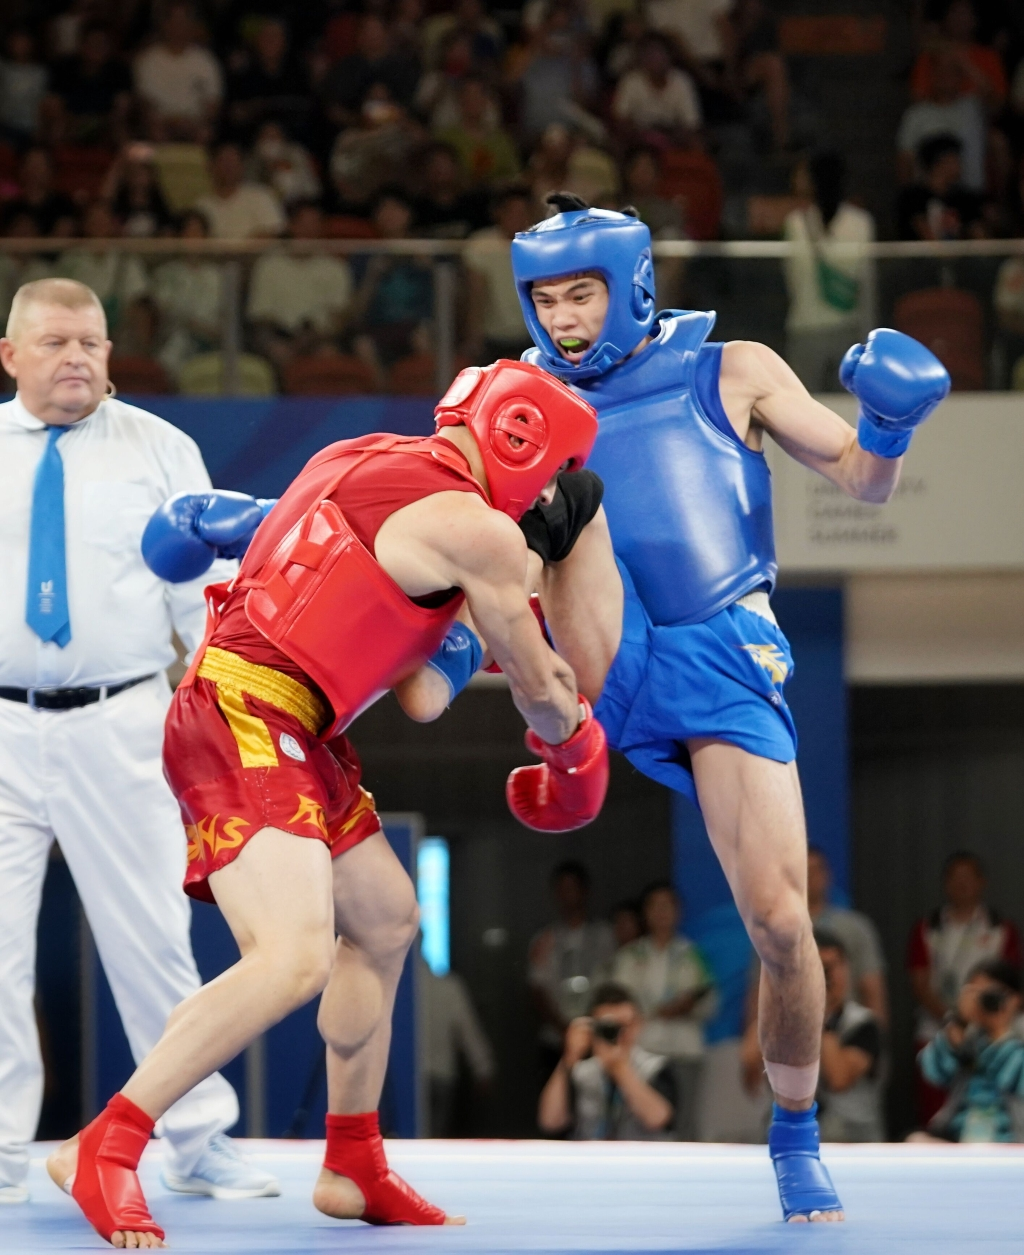 He Feng (in blue) beats an Iran athlete and claims gold in the men’s Sanda 70kg final.